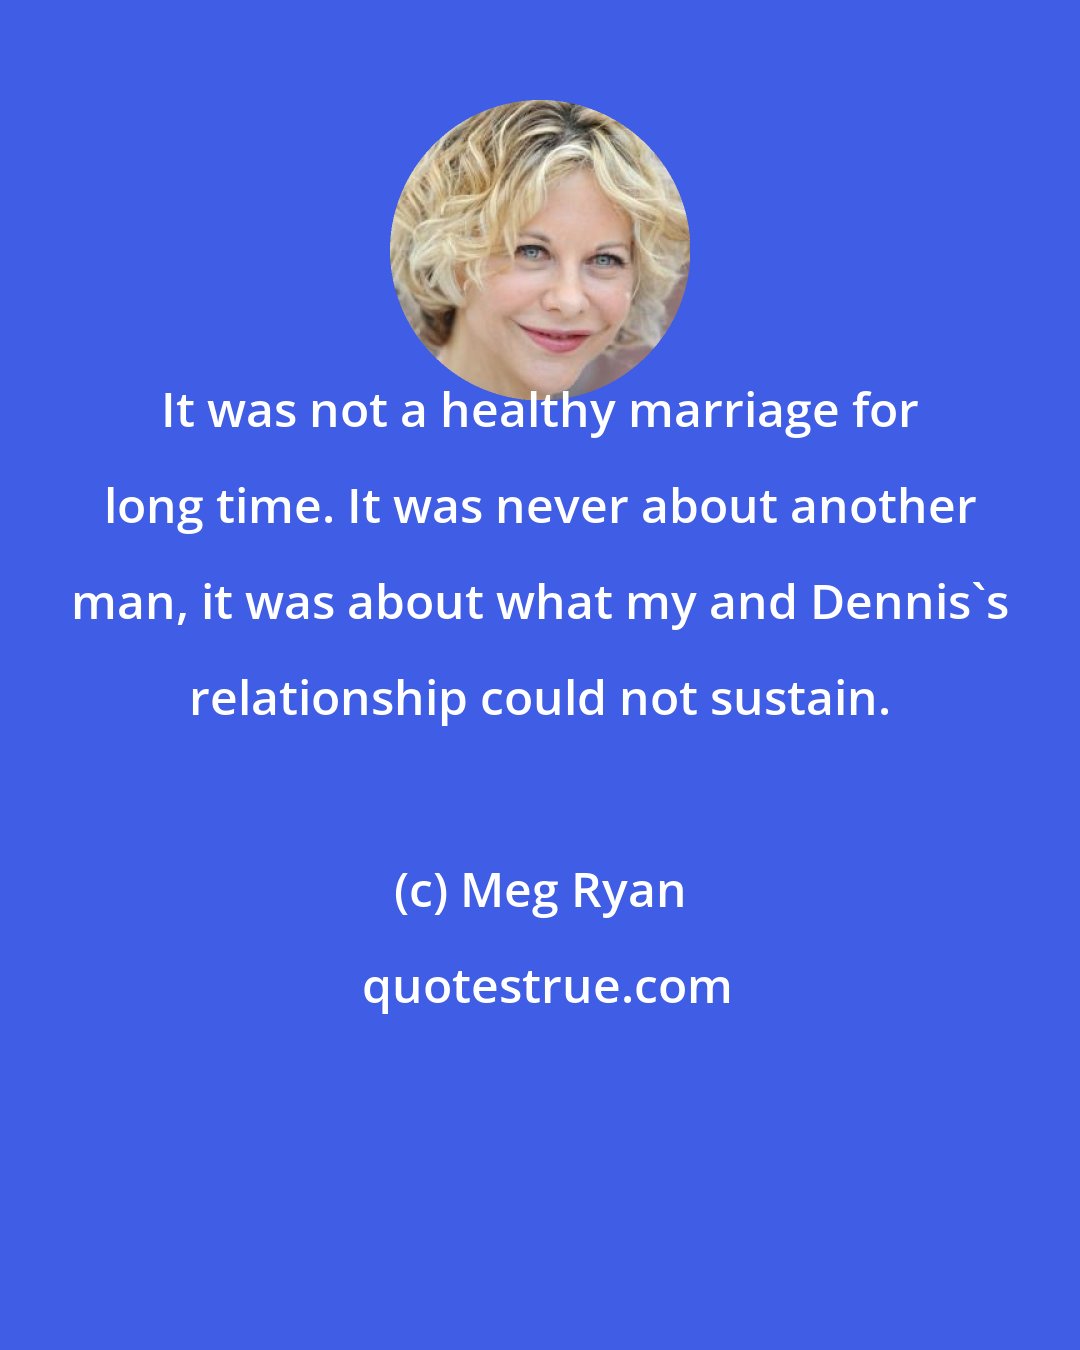 Meg Ryan: It was not a healthy marriage for long time. It was never about another man, it was about what my and Dennis's relationship could not sustain.